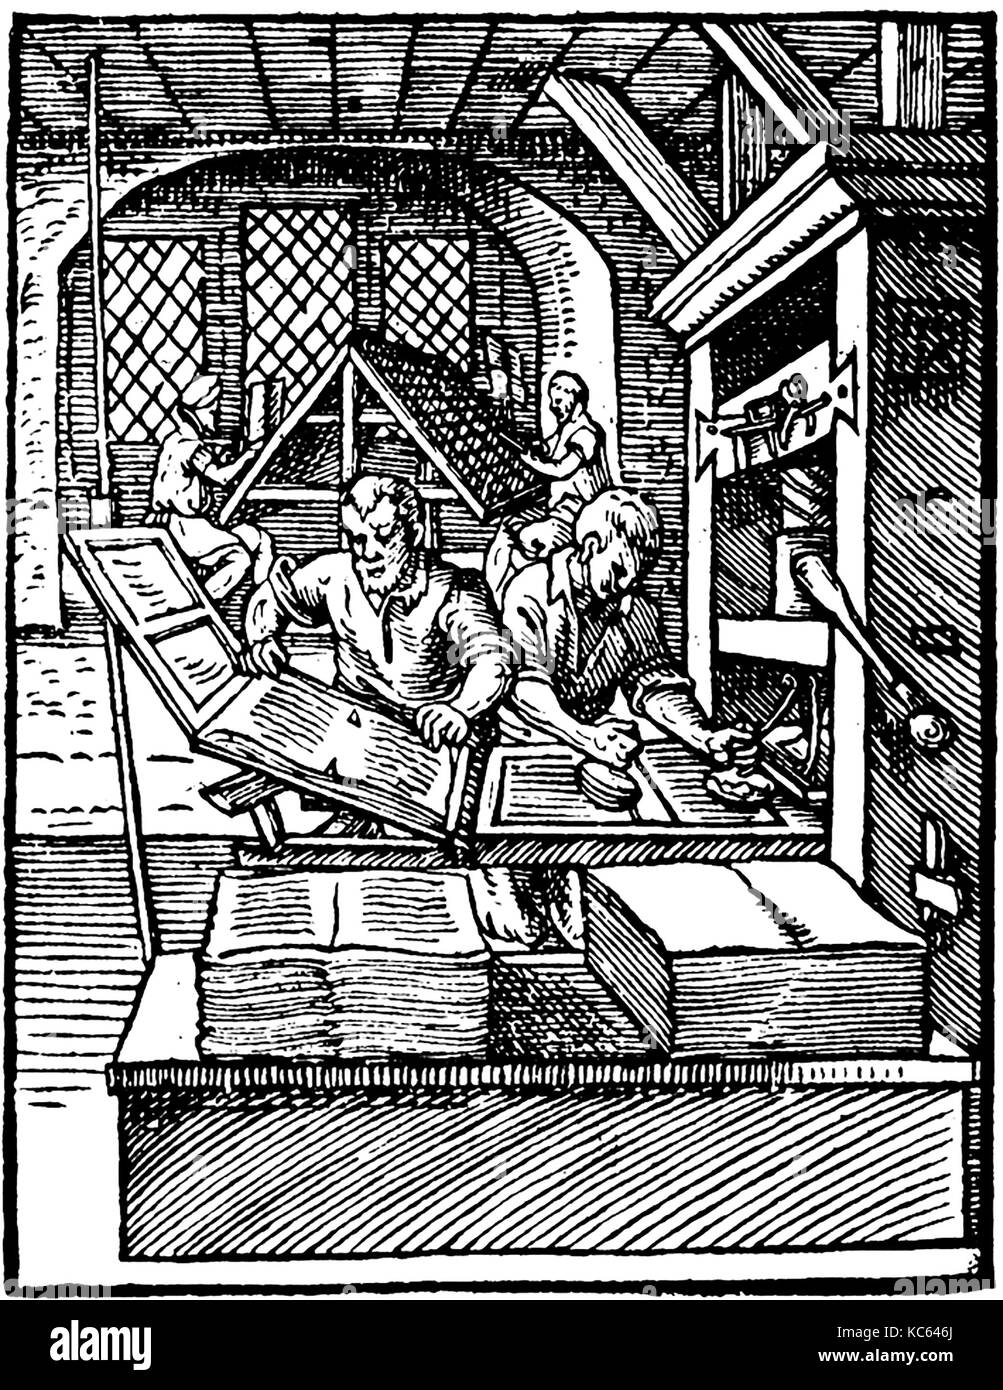 PRINTING PRESS  From a 1568 engraving. Stock Photo